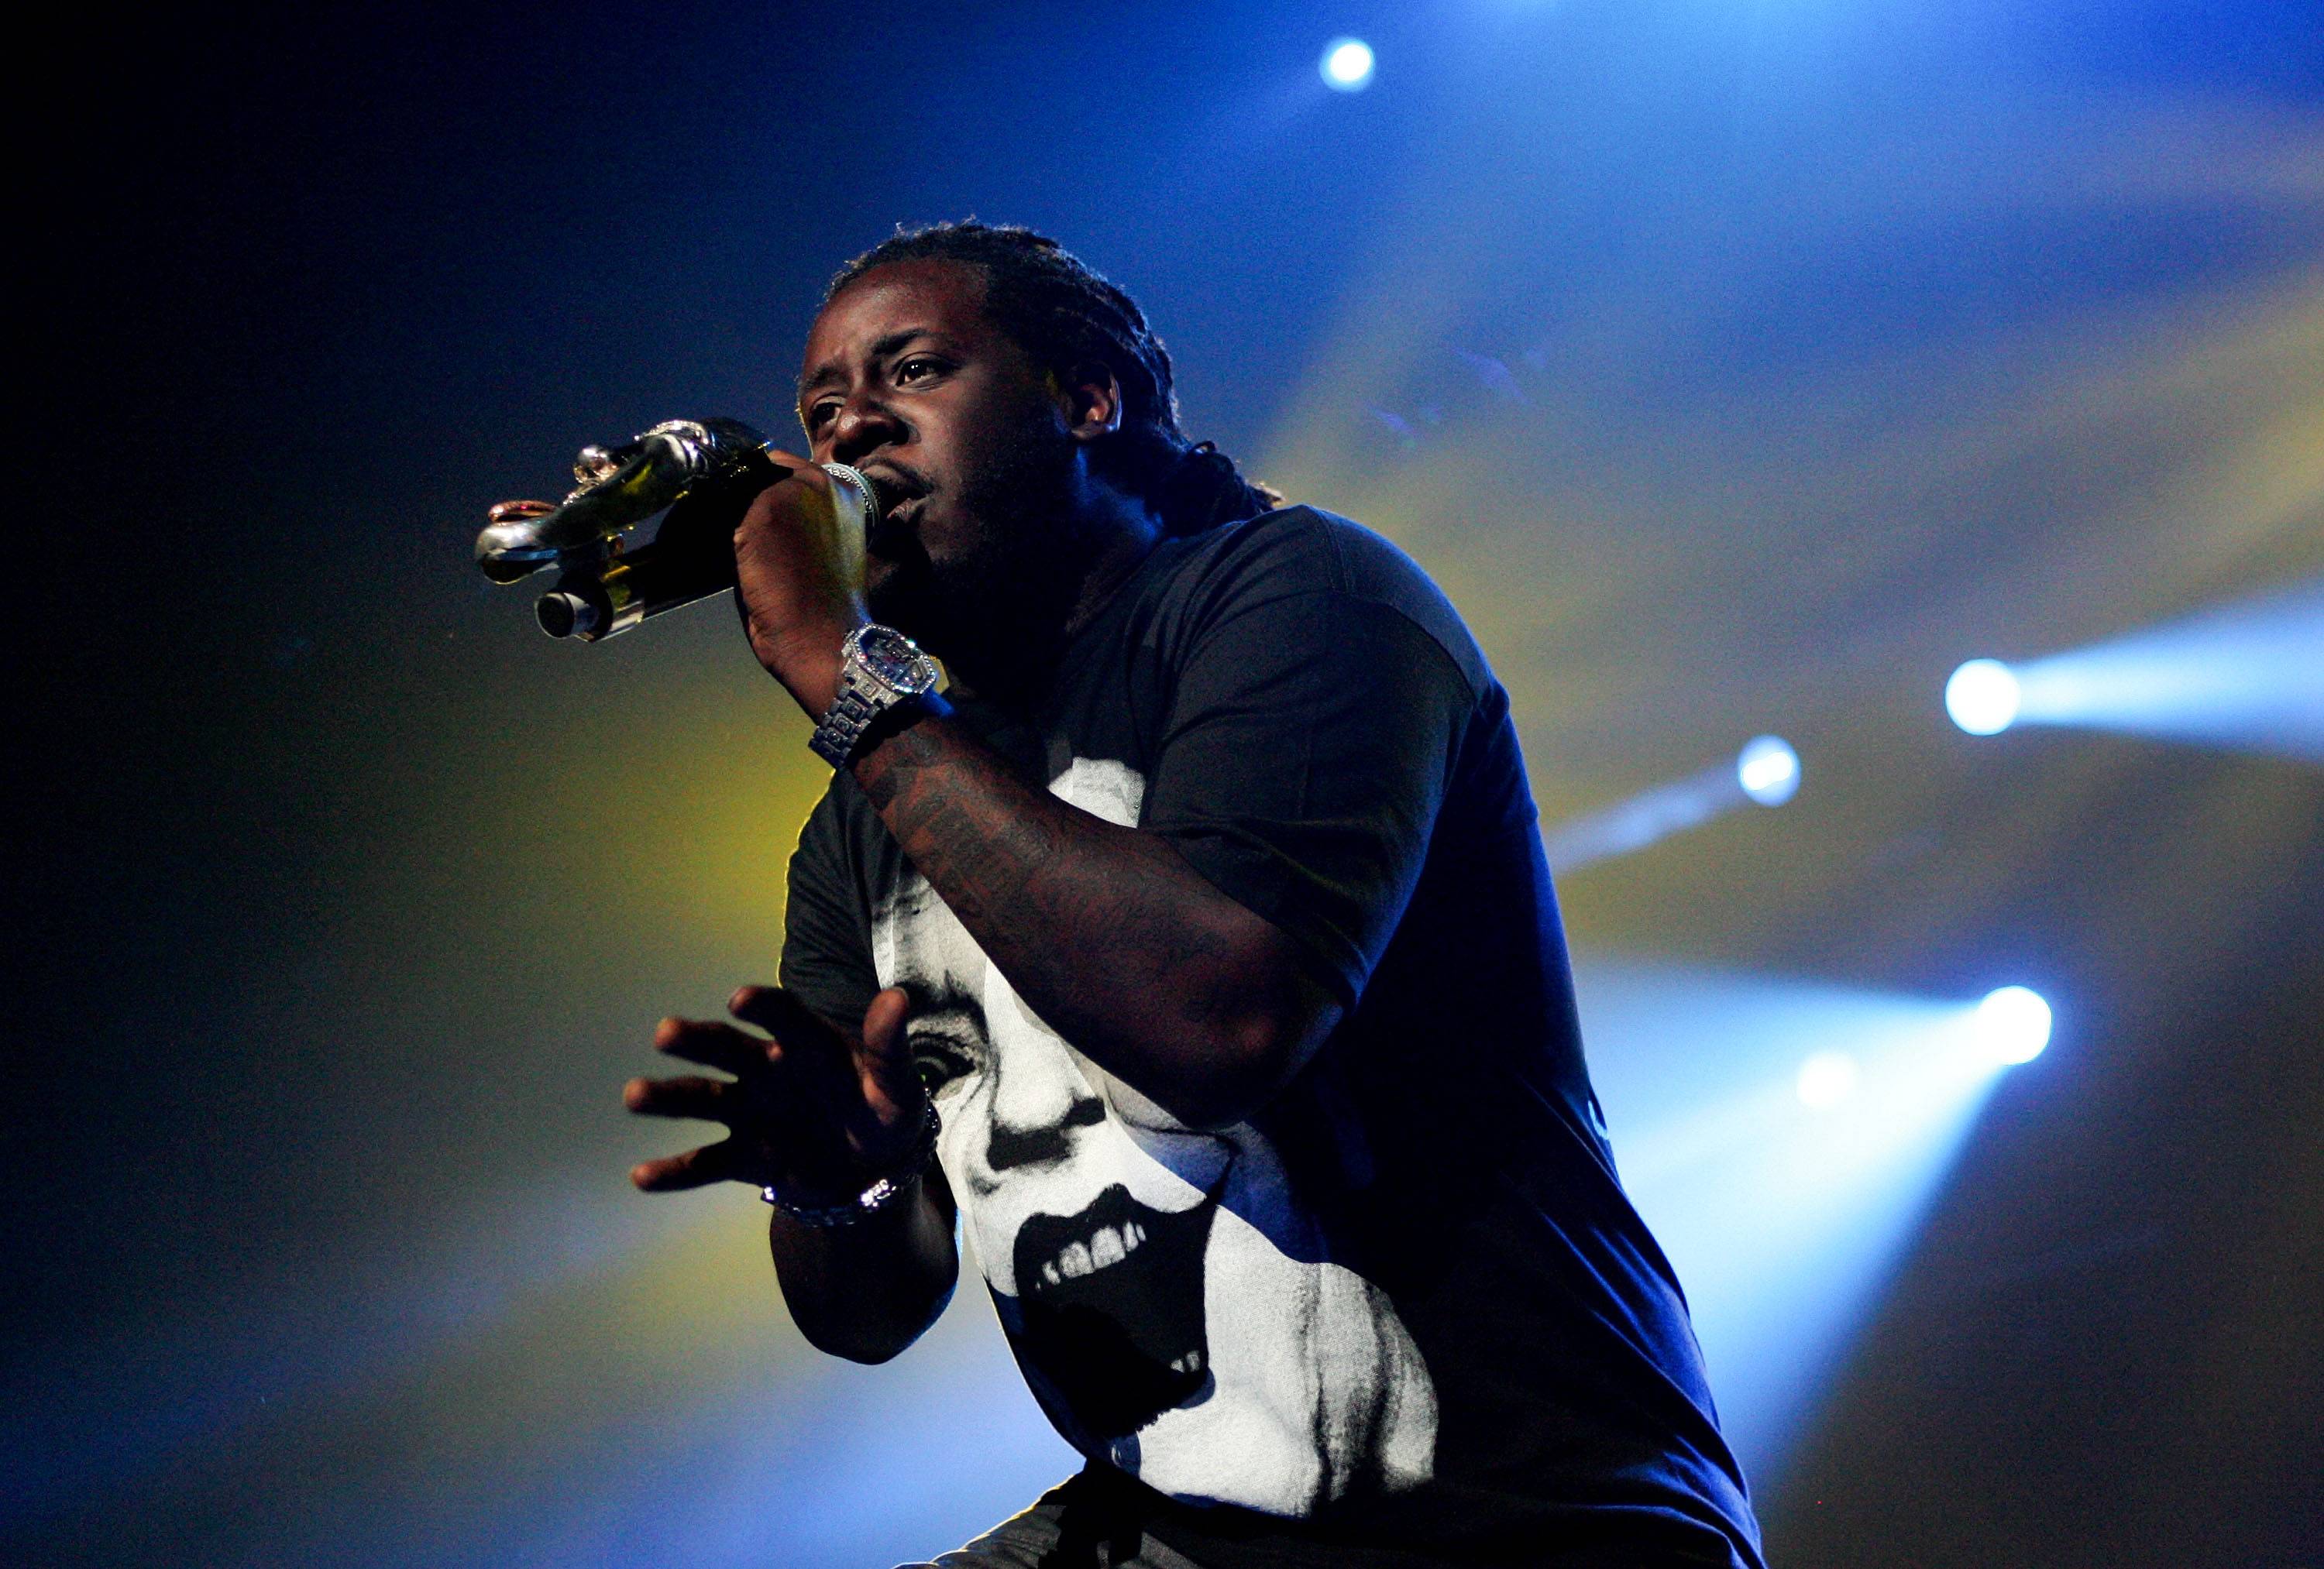 SYDNEY, AUSTRALIA - OCTOBER 27:  Hip pop singer T-Pain, supporting Akon performs on stage at the Acer Arena on October 27, 2009 in Sydney, Australia.  (Photo by Sergio Dionisio/Getty Images)